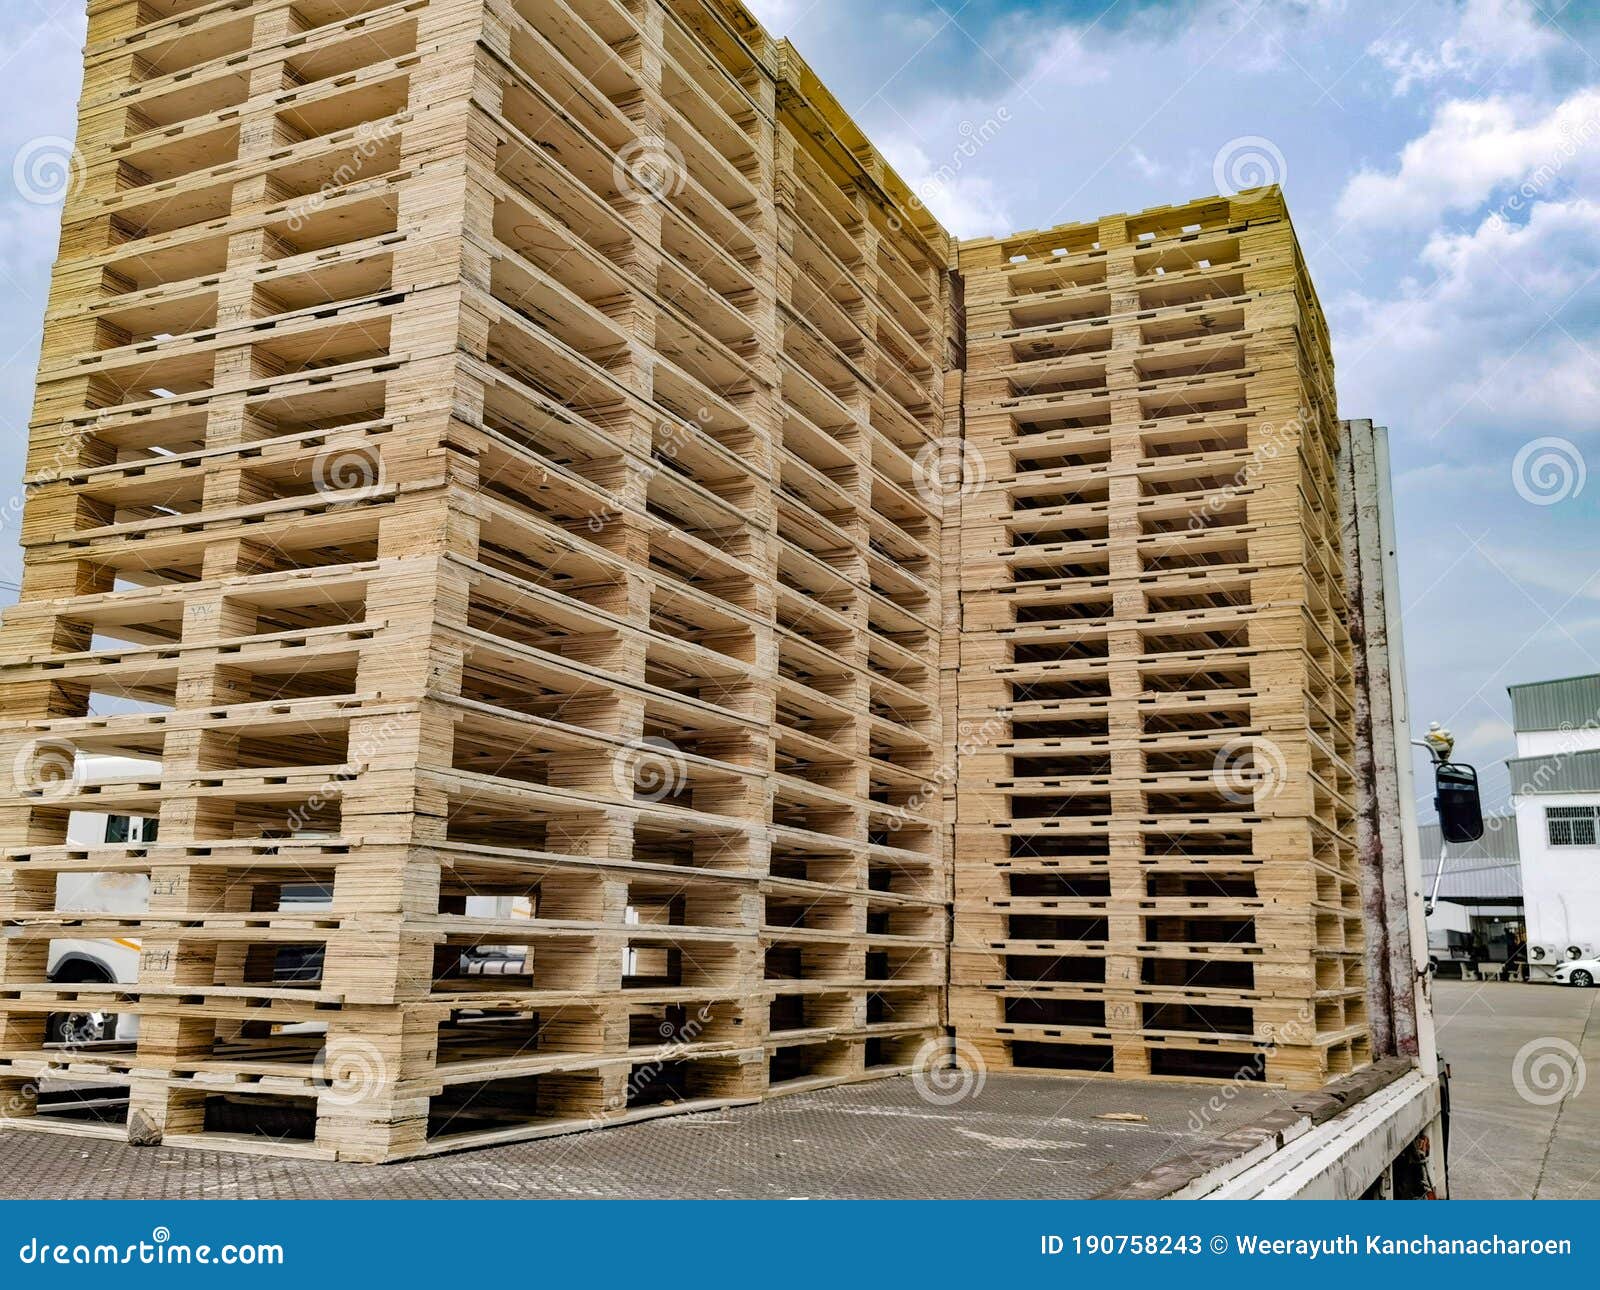 Worker Driving Forklift To Loading And Unloading Wooden Pallets From Truck To Warehouse Cargo Storage Shipment In Logistics And Stock Image Image Of Cardboard Construction 190758243